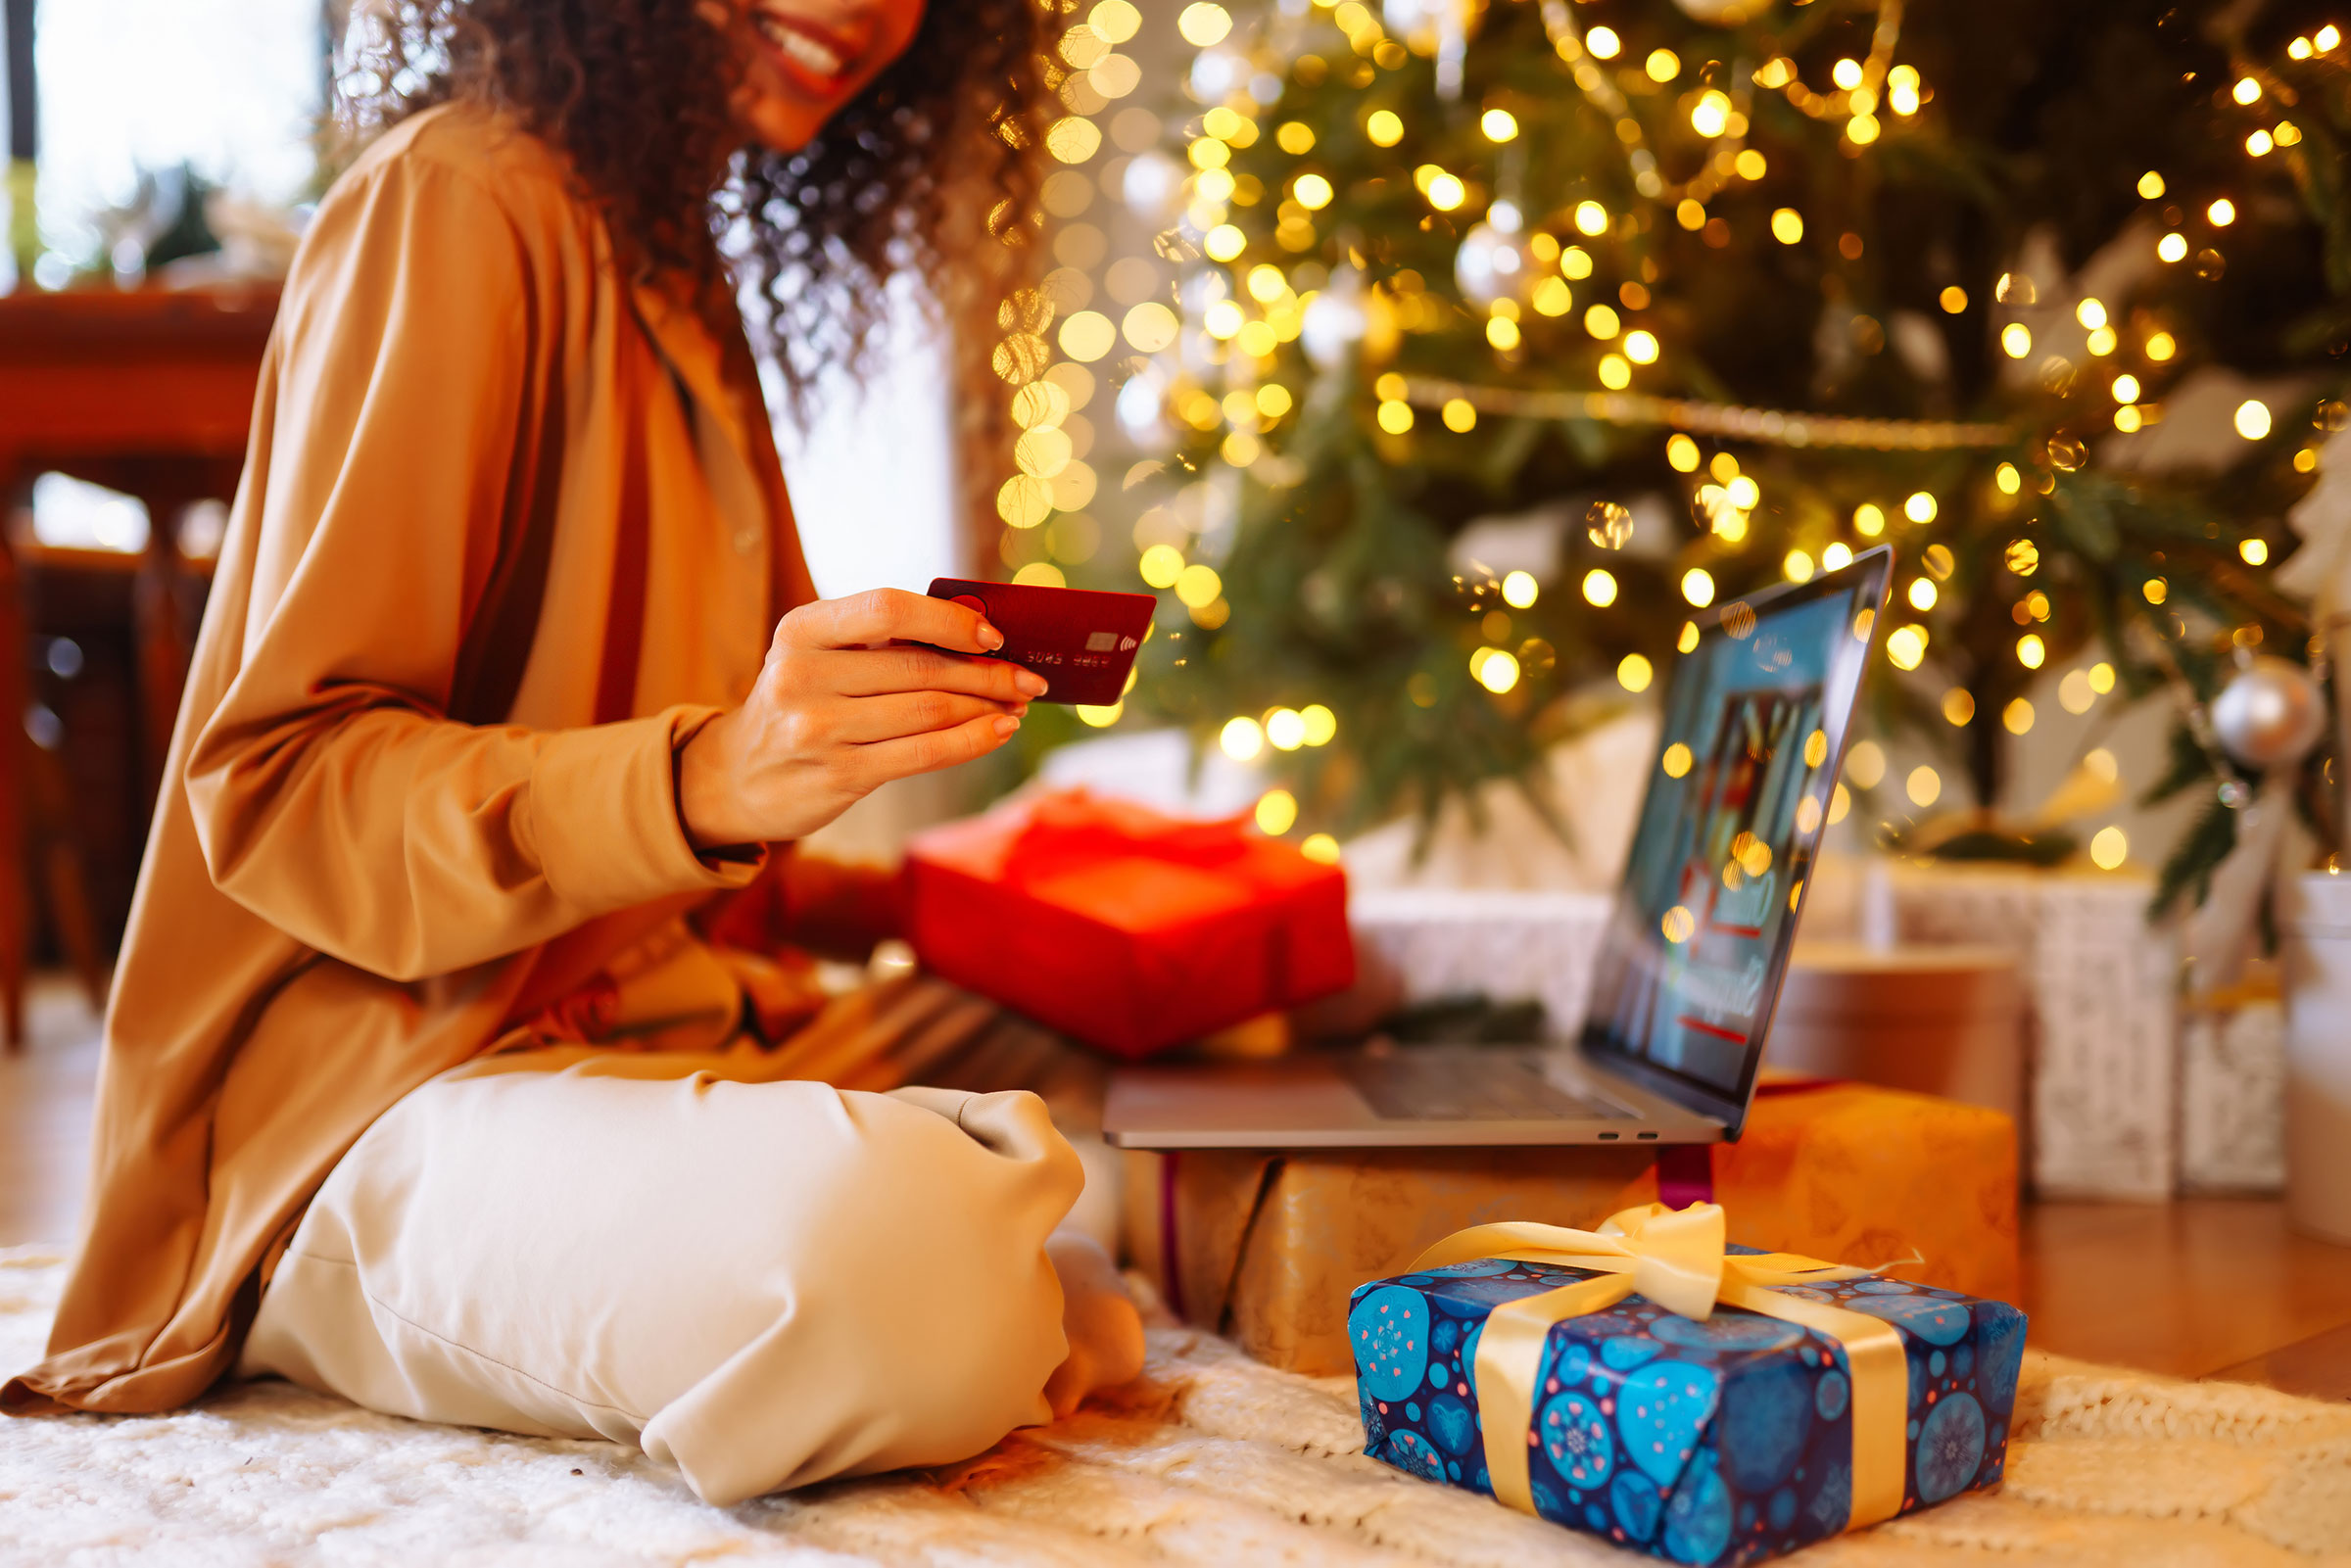 Woman next to Christmas tree uses credit card to shop online